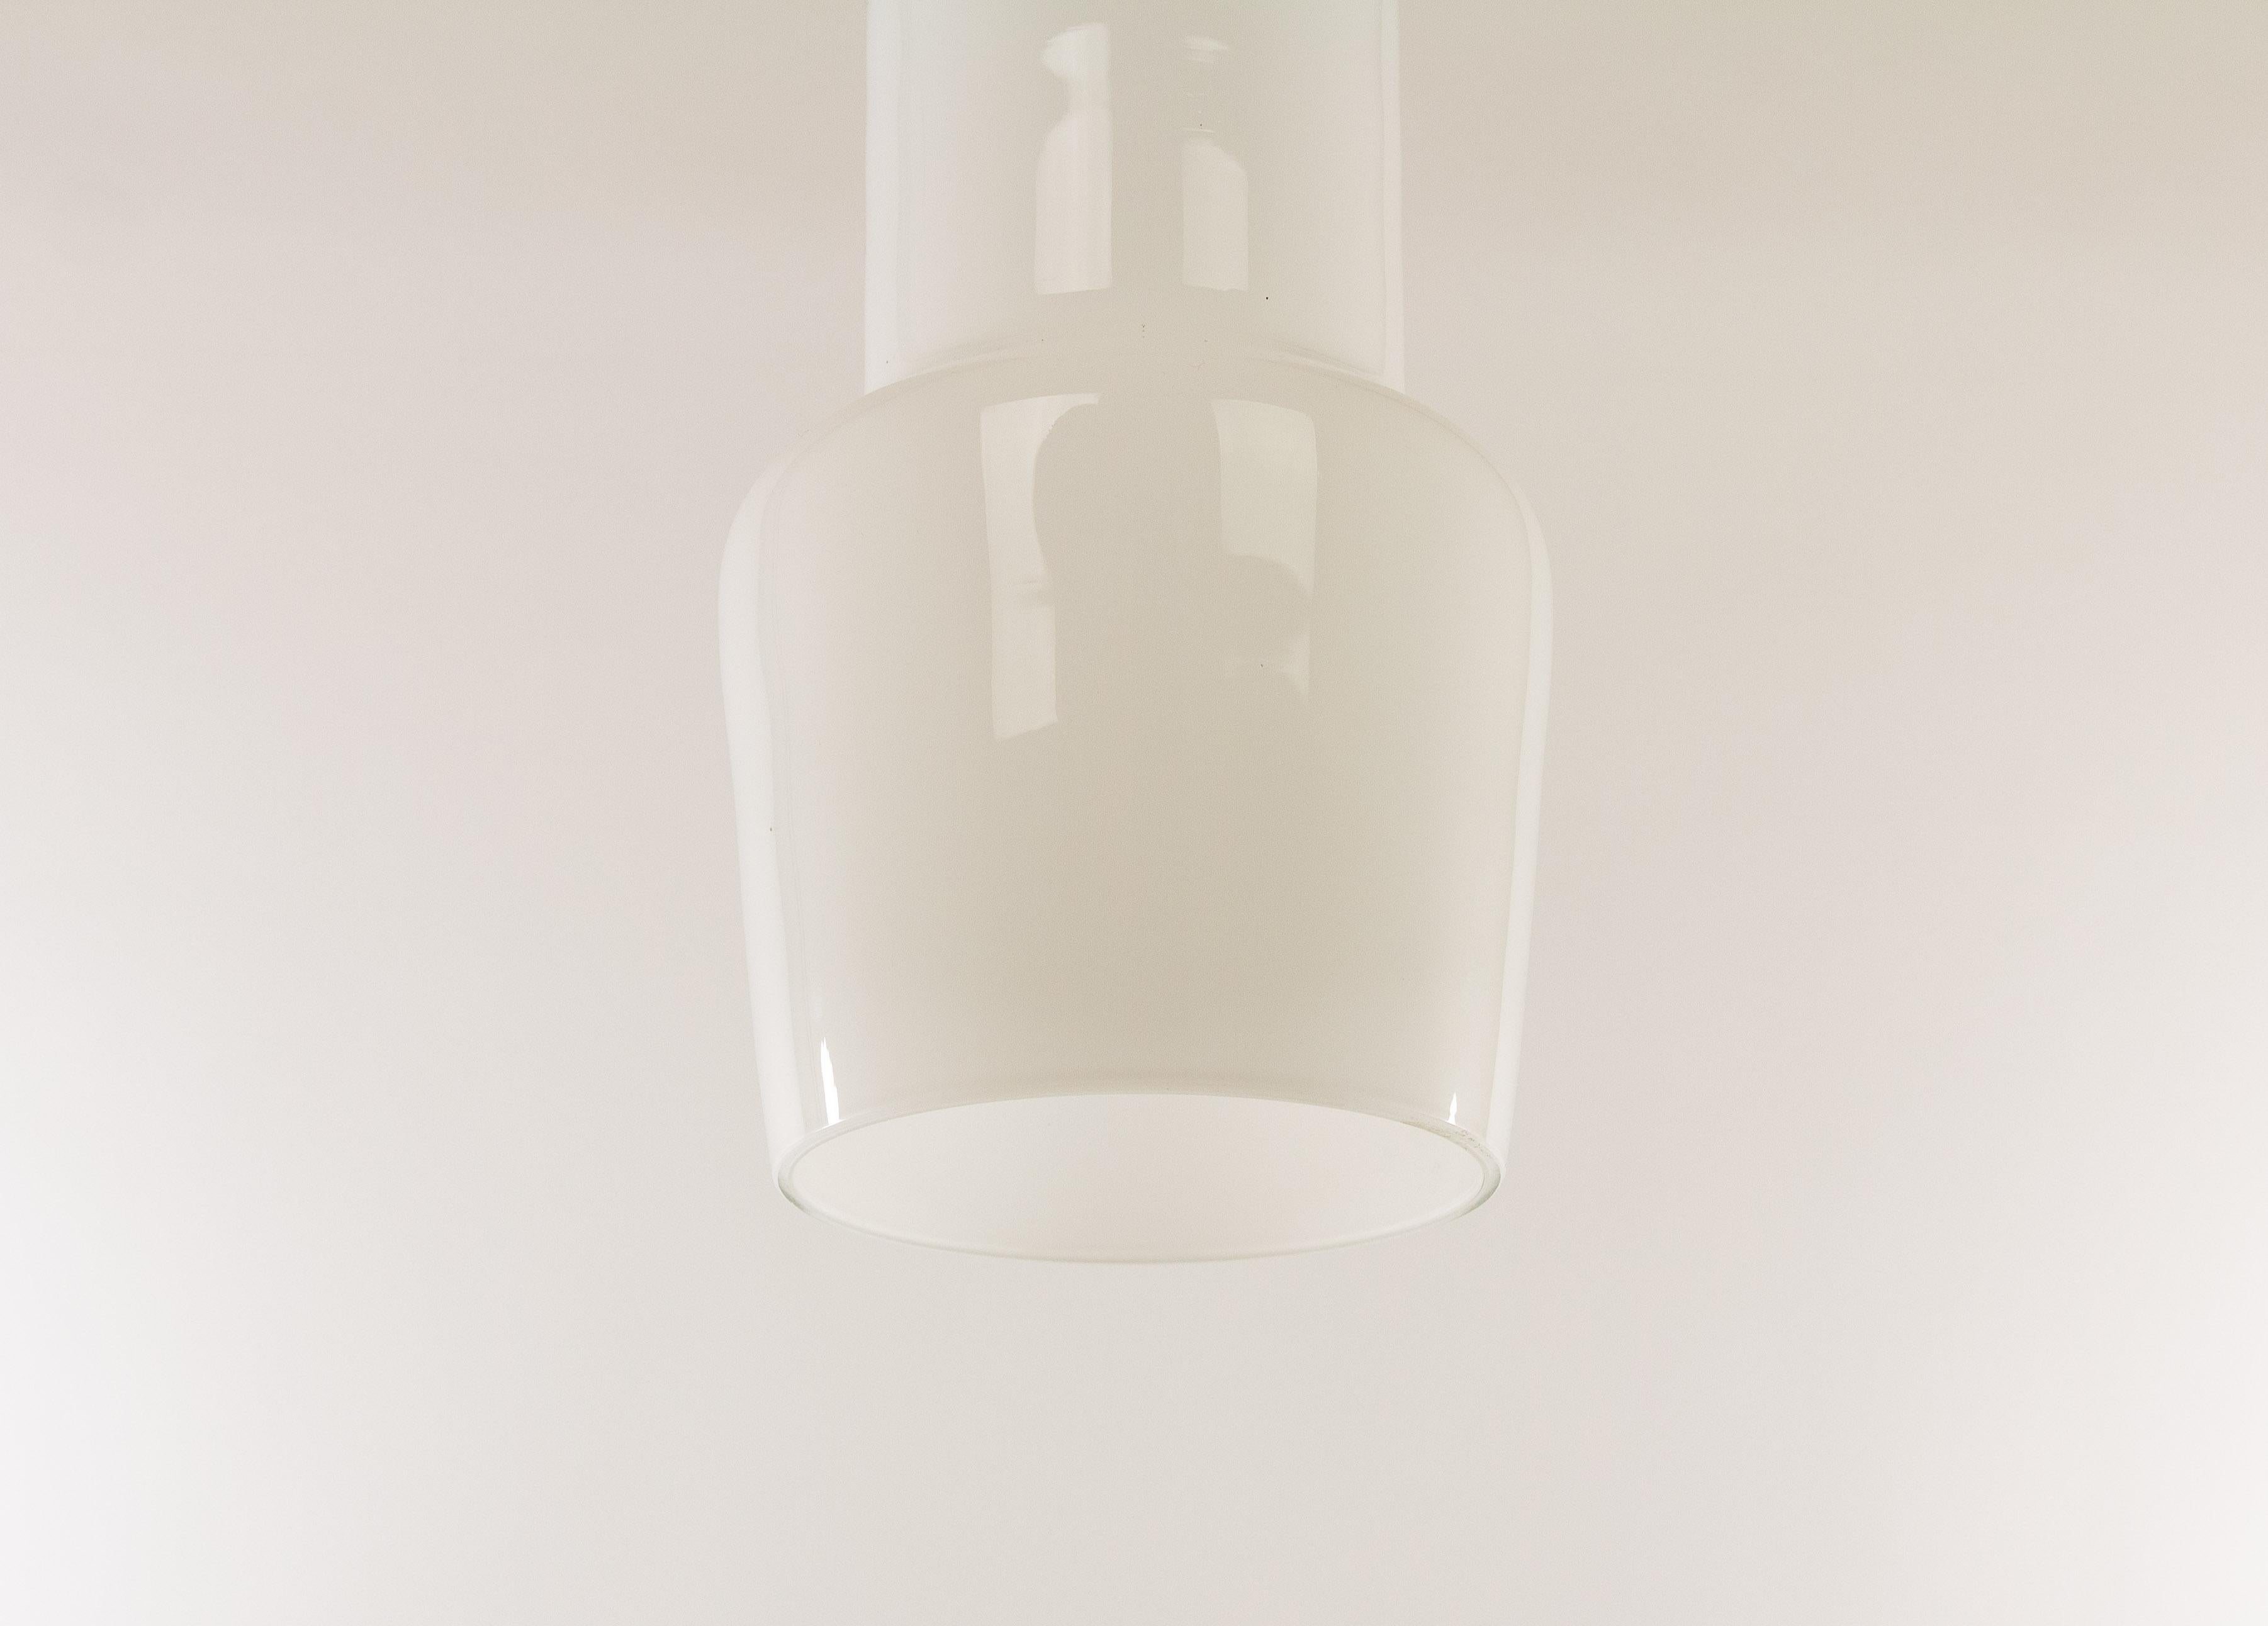 Mid-20th Century White and Blue Glass Pendant by Massimo Vignelli for Venini, 1950s For Sale